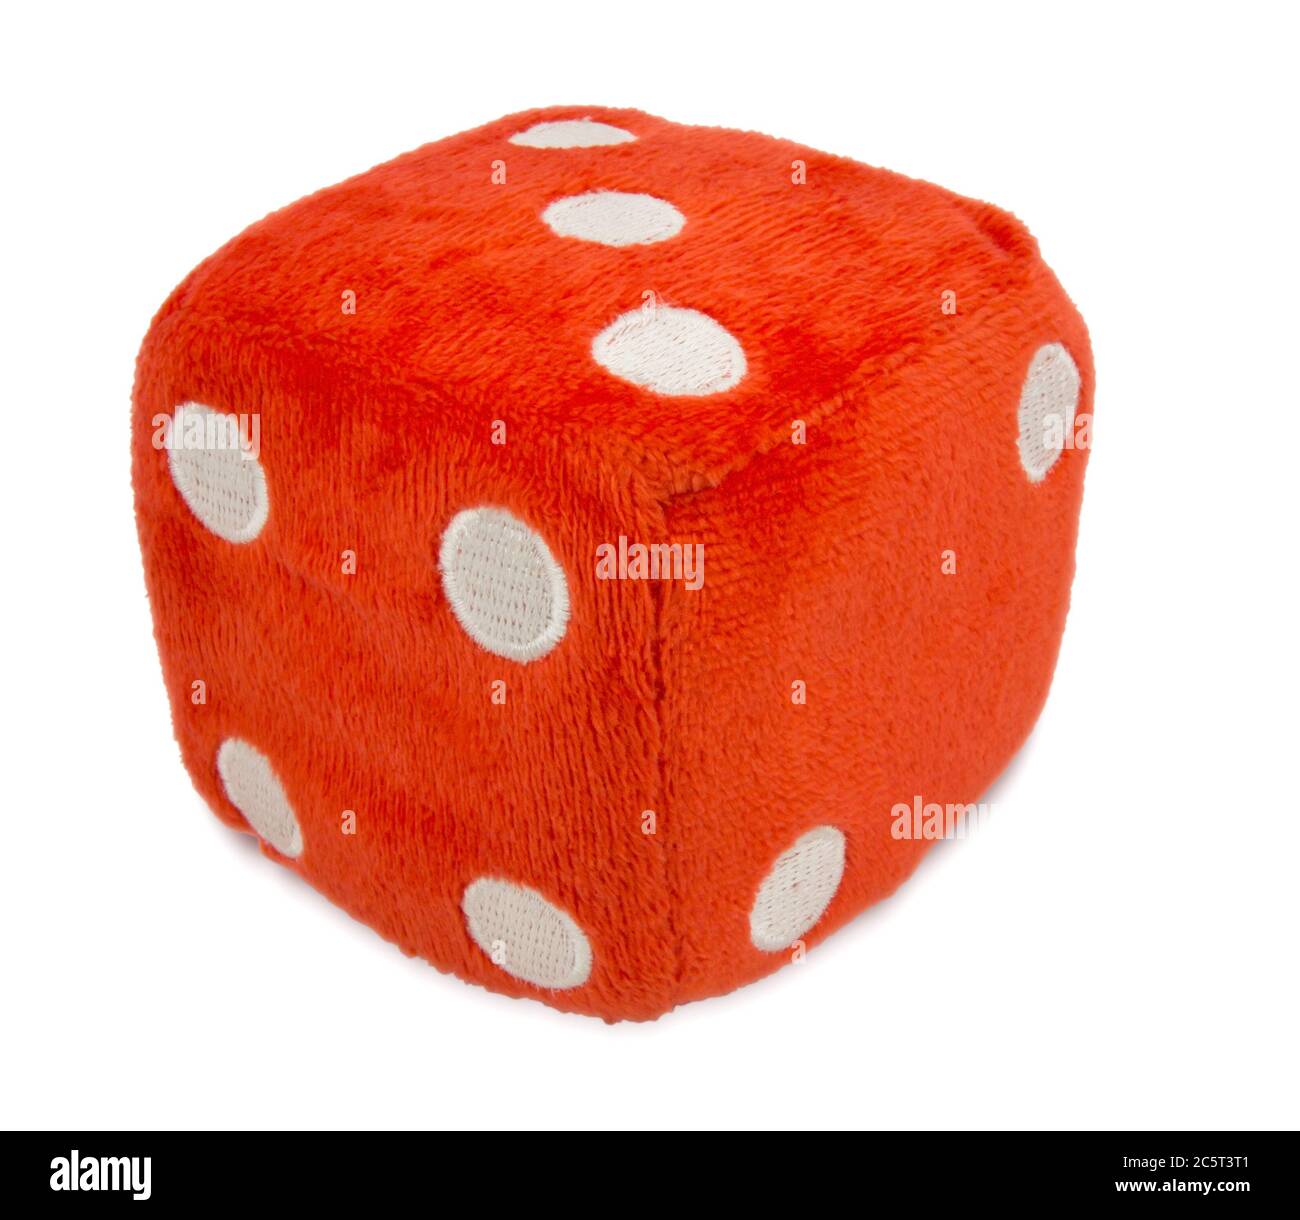 Red fuzzy dice isolated on white. Clipping path included. Stock Photo